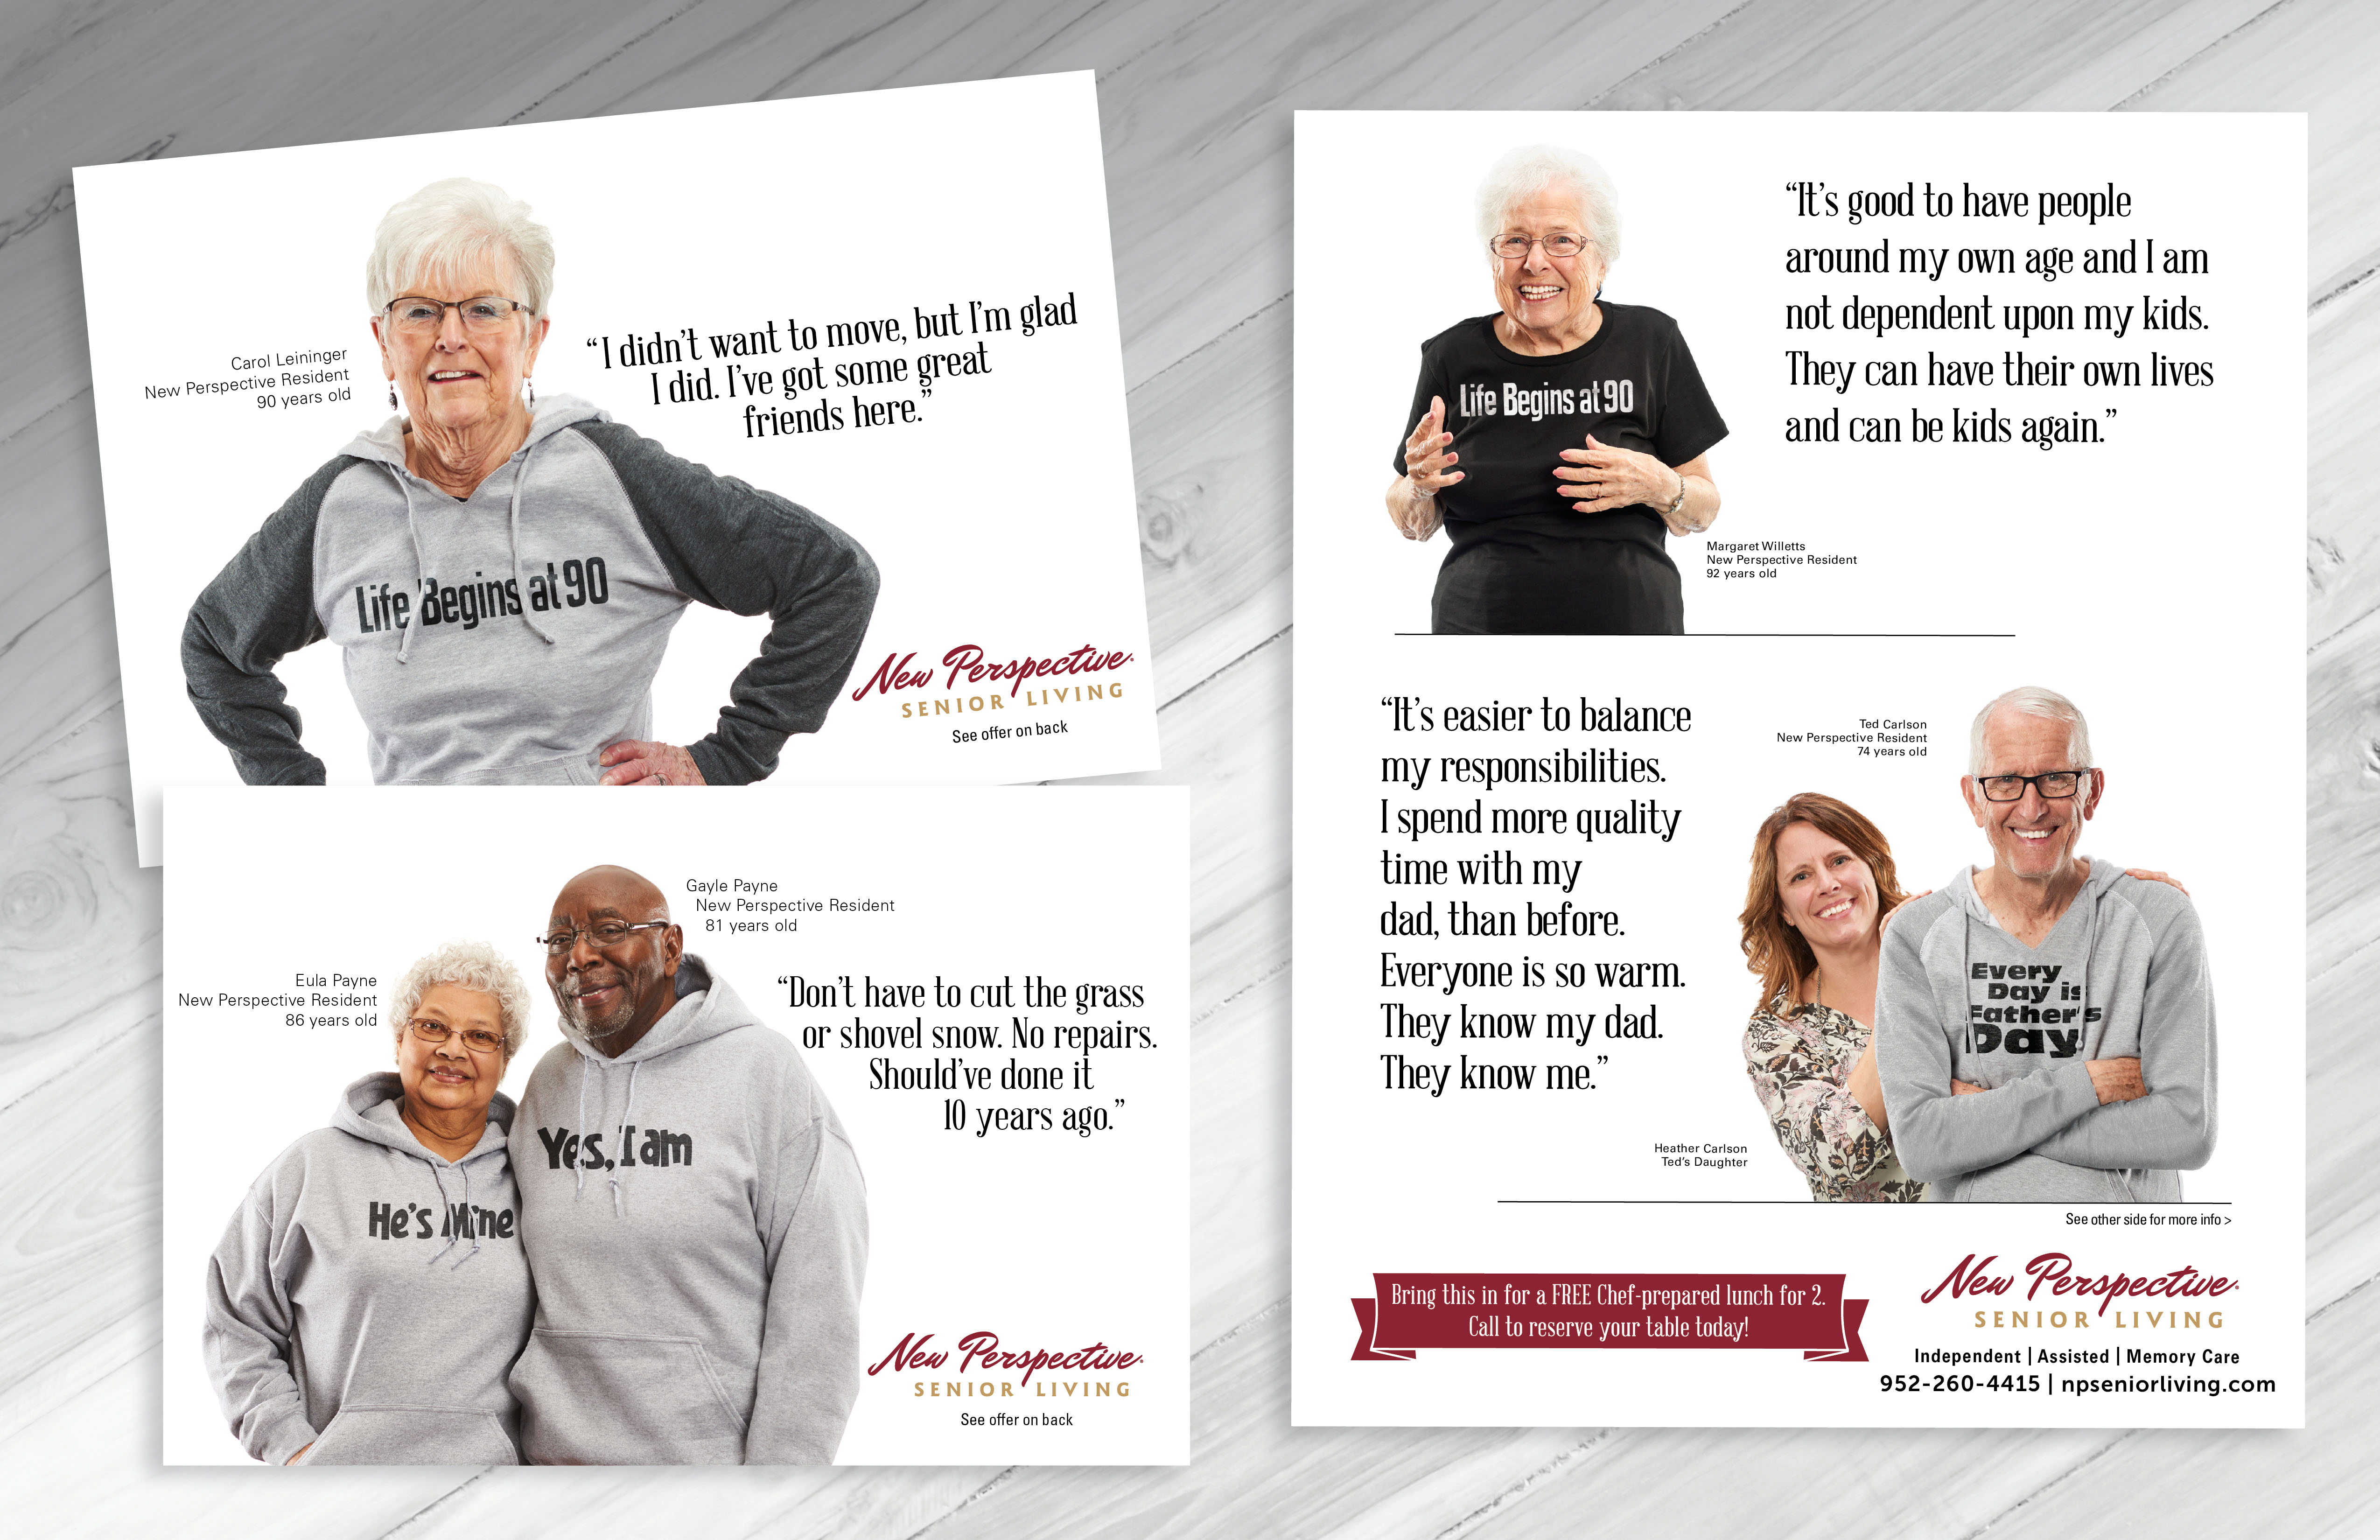 Latest Ad Campaign from New Perspective Senior Living Showcases Actual Residents